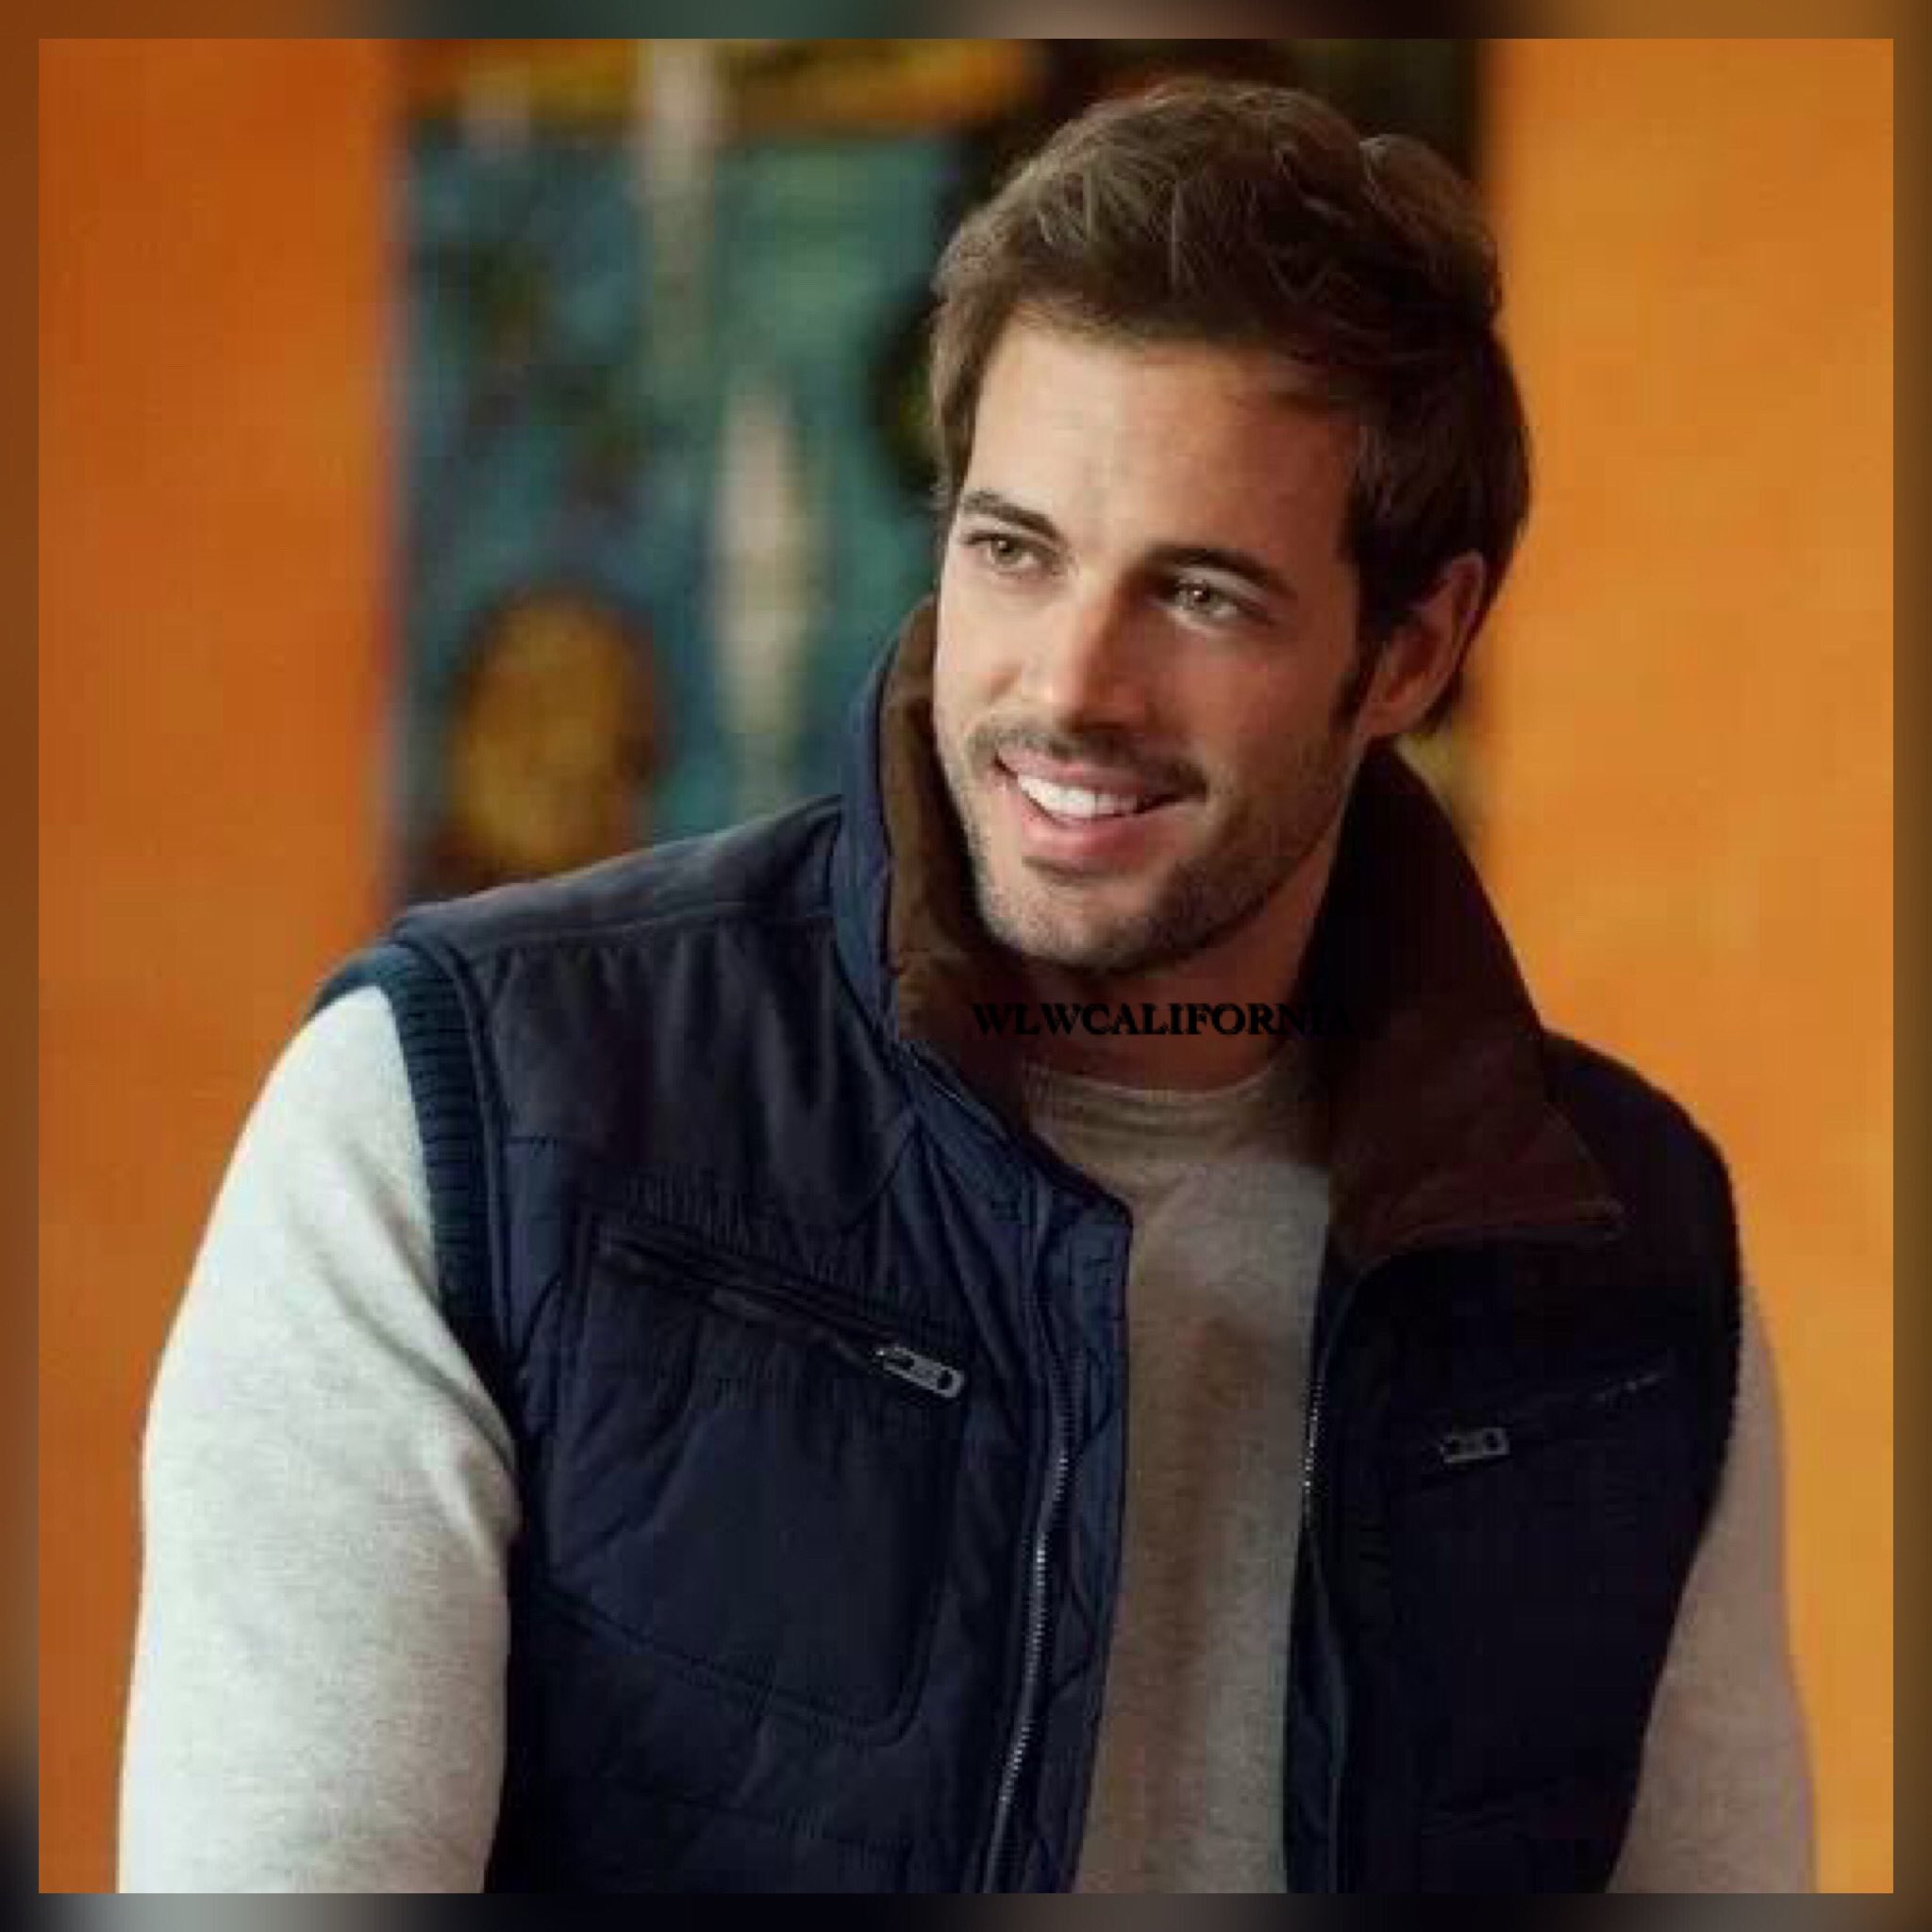 WLW California on Twitter: "Have a Good Week! @willylevy29 #willevy #w...